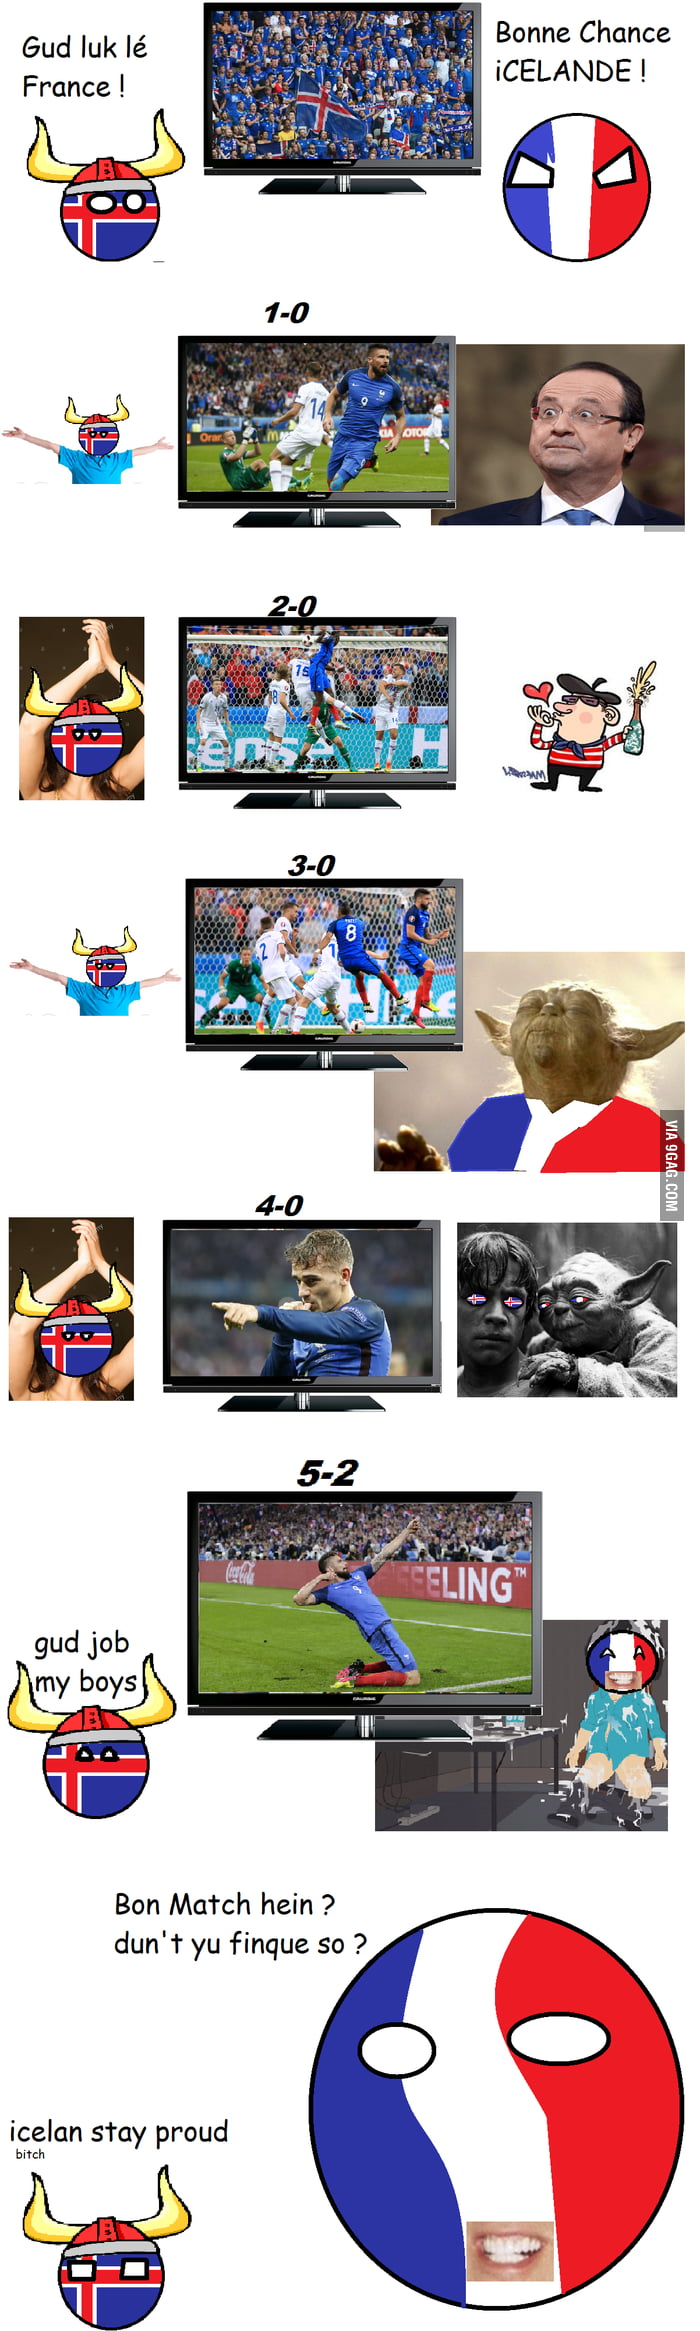 Iceland France Match From A French POV My First Countryball Meme